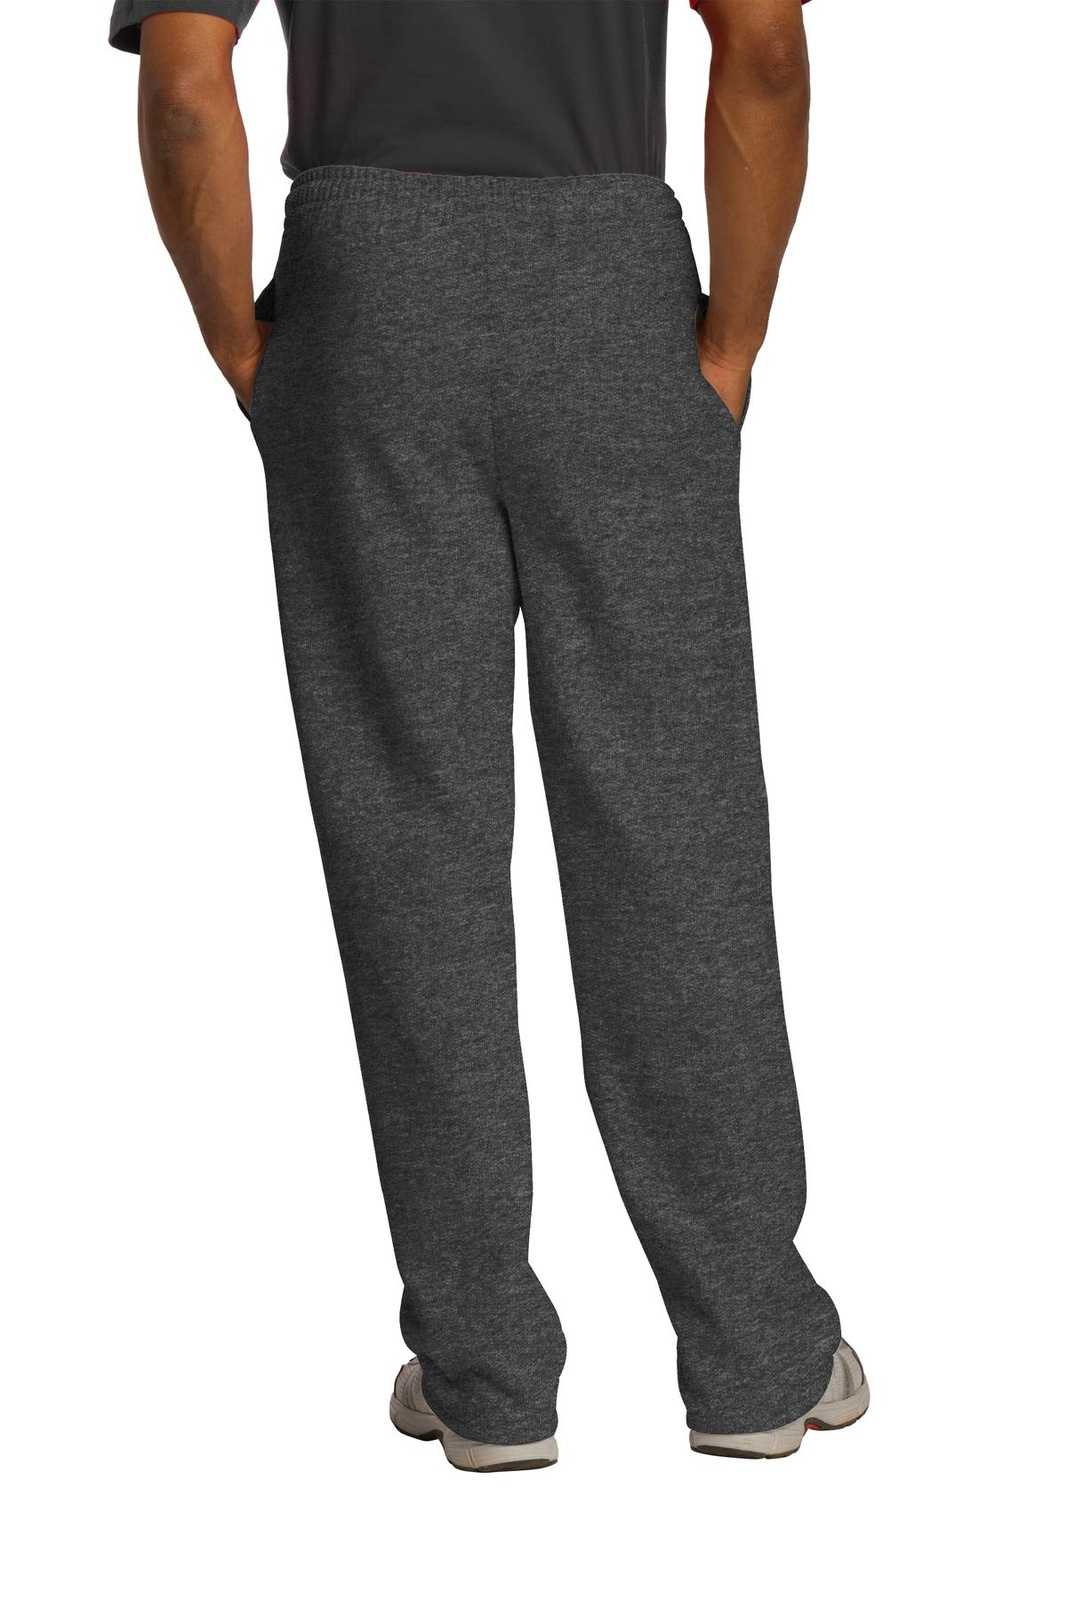 Jerzees 974MP Nublend Open Bottom Pant with Pockets - Black Heather - HIT a Double